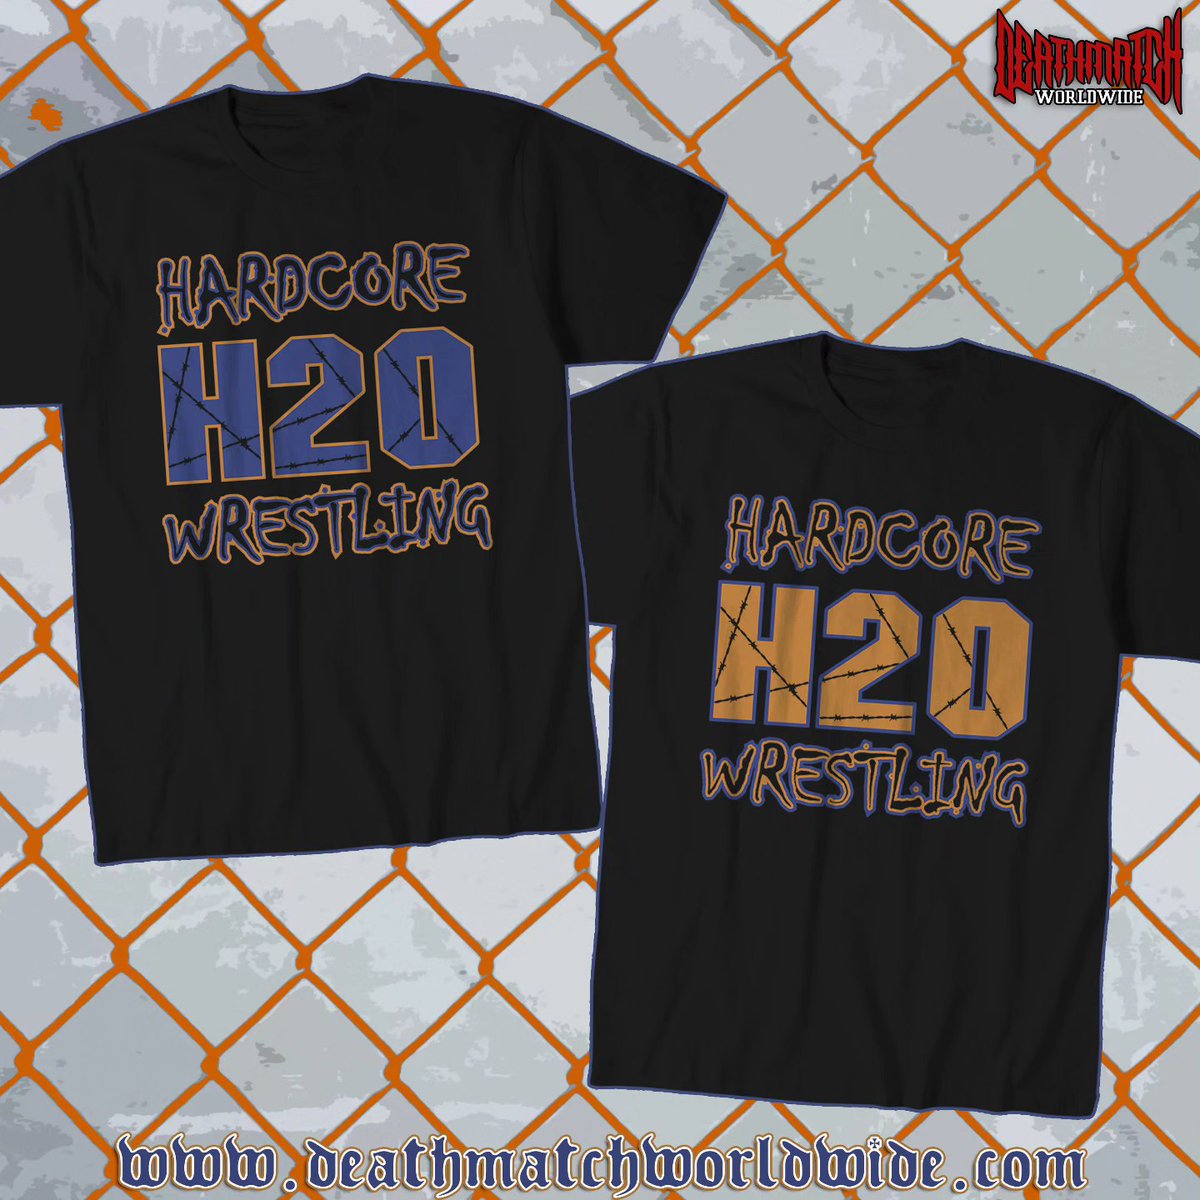 H2O Tee's @DMWWofficial